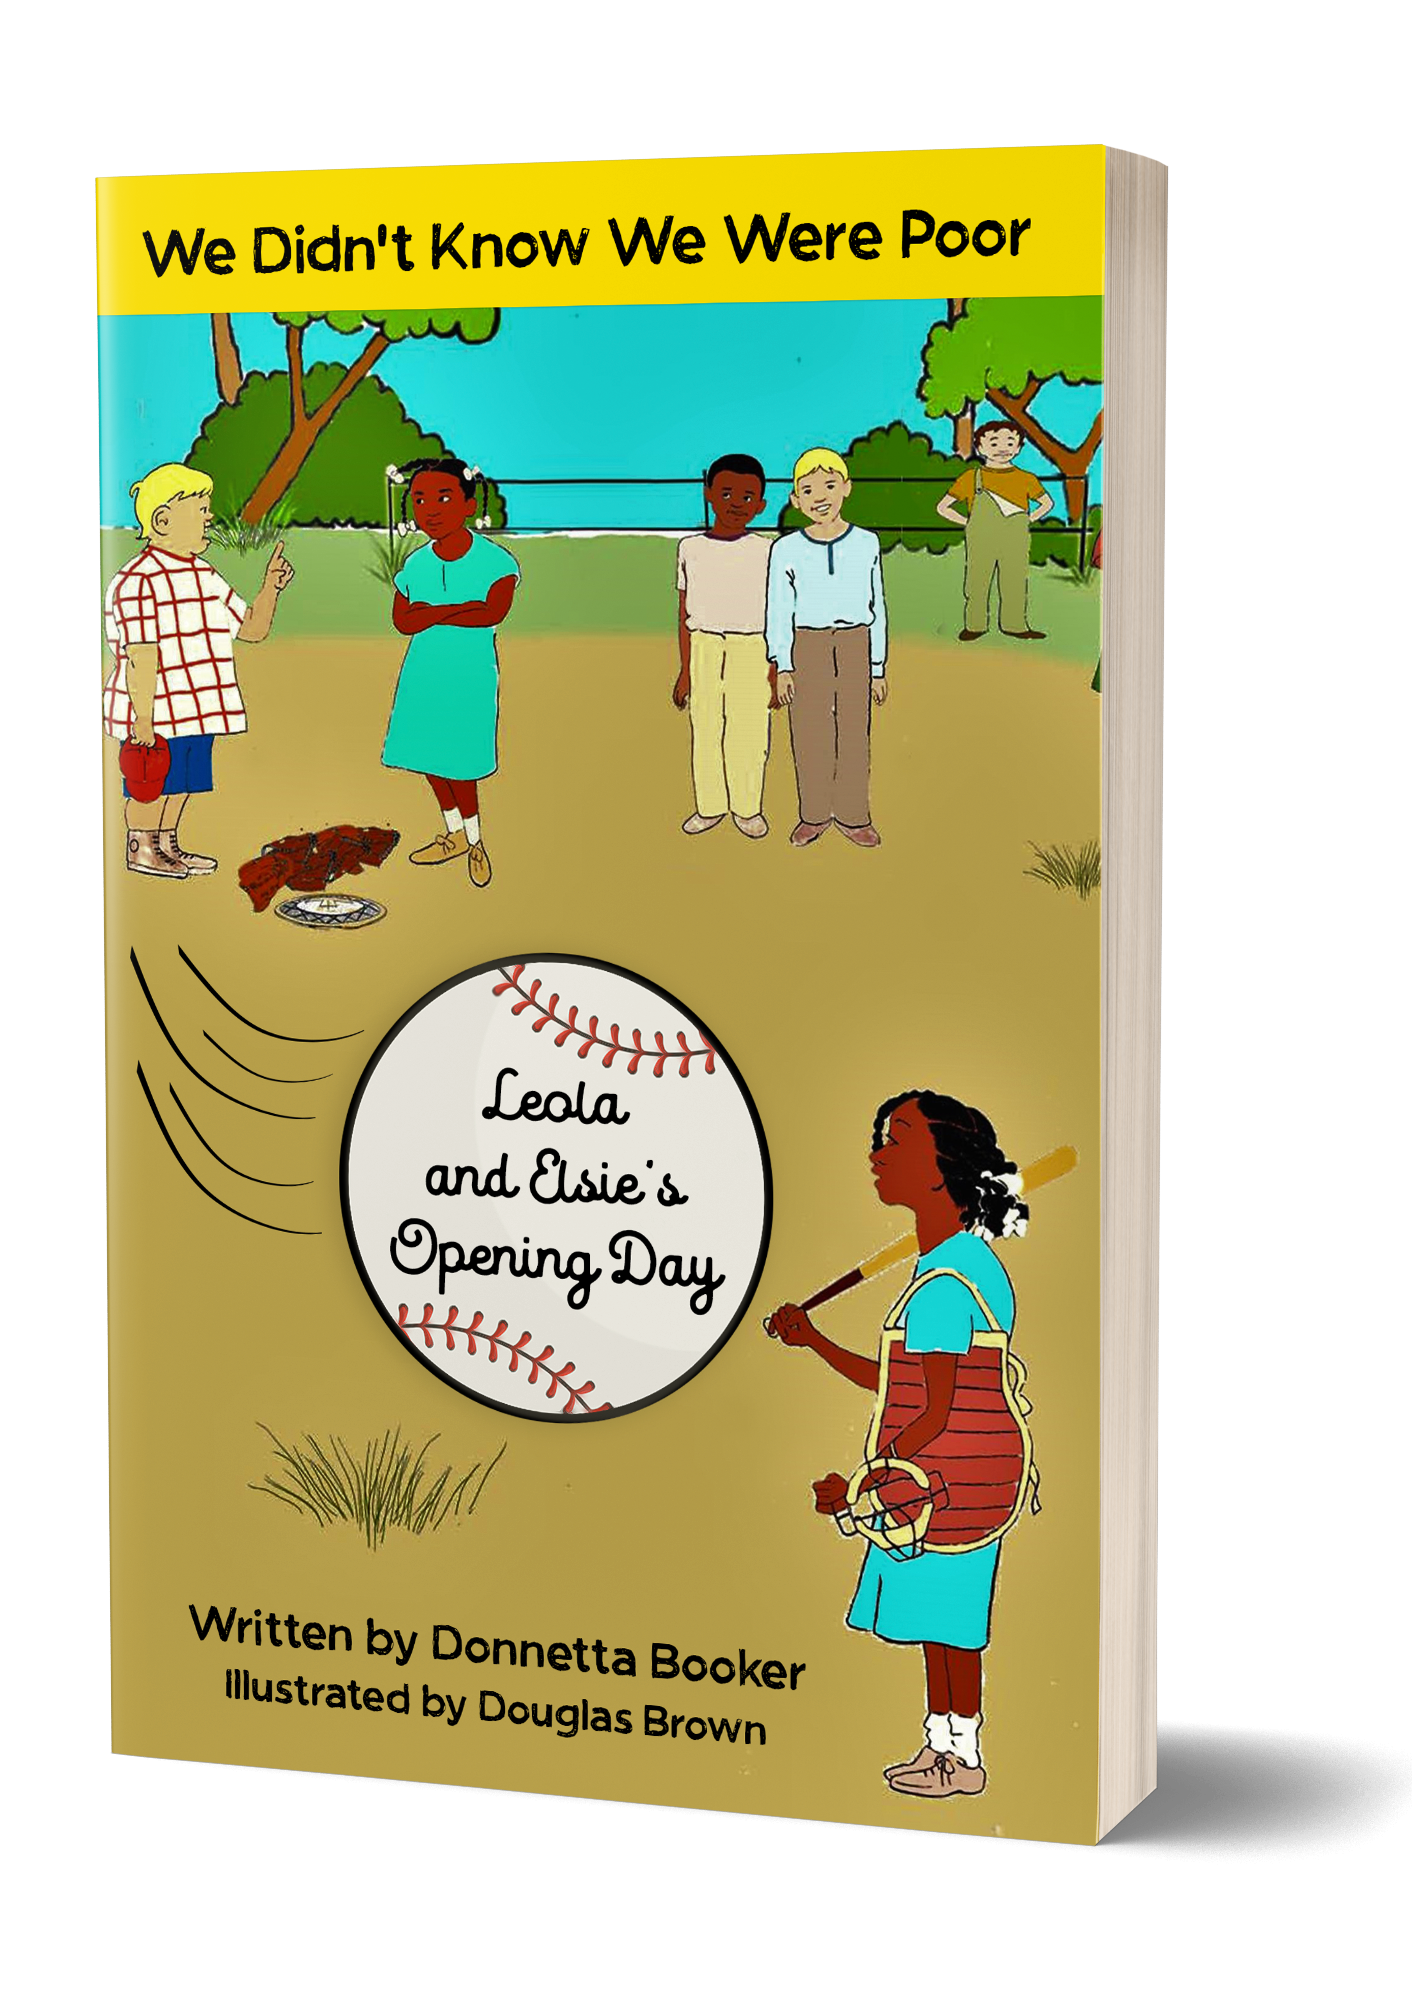  The first installment in a series by Donnetta Booker,  We Didn’t Know We Were Poor: Leola and Elsie’s Opening Day  is NOW AVAILABLE. 